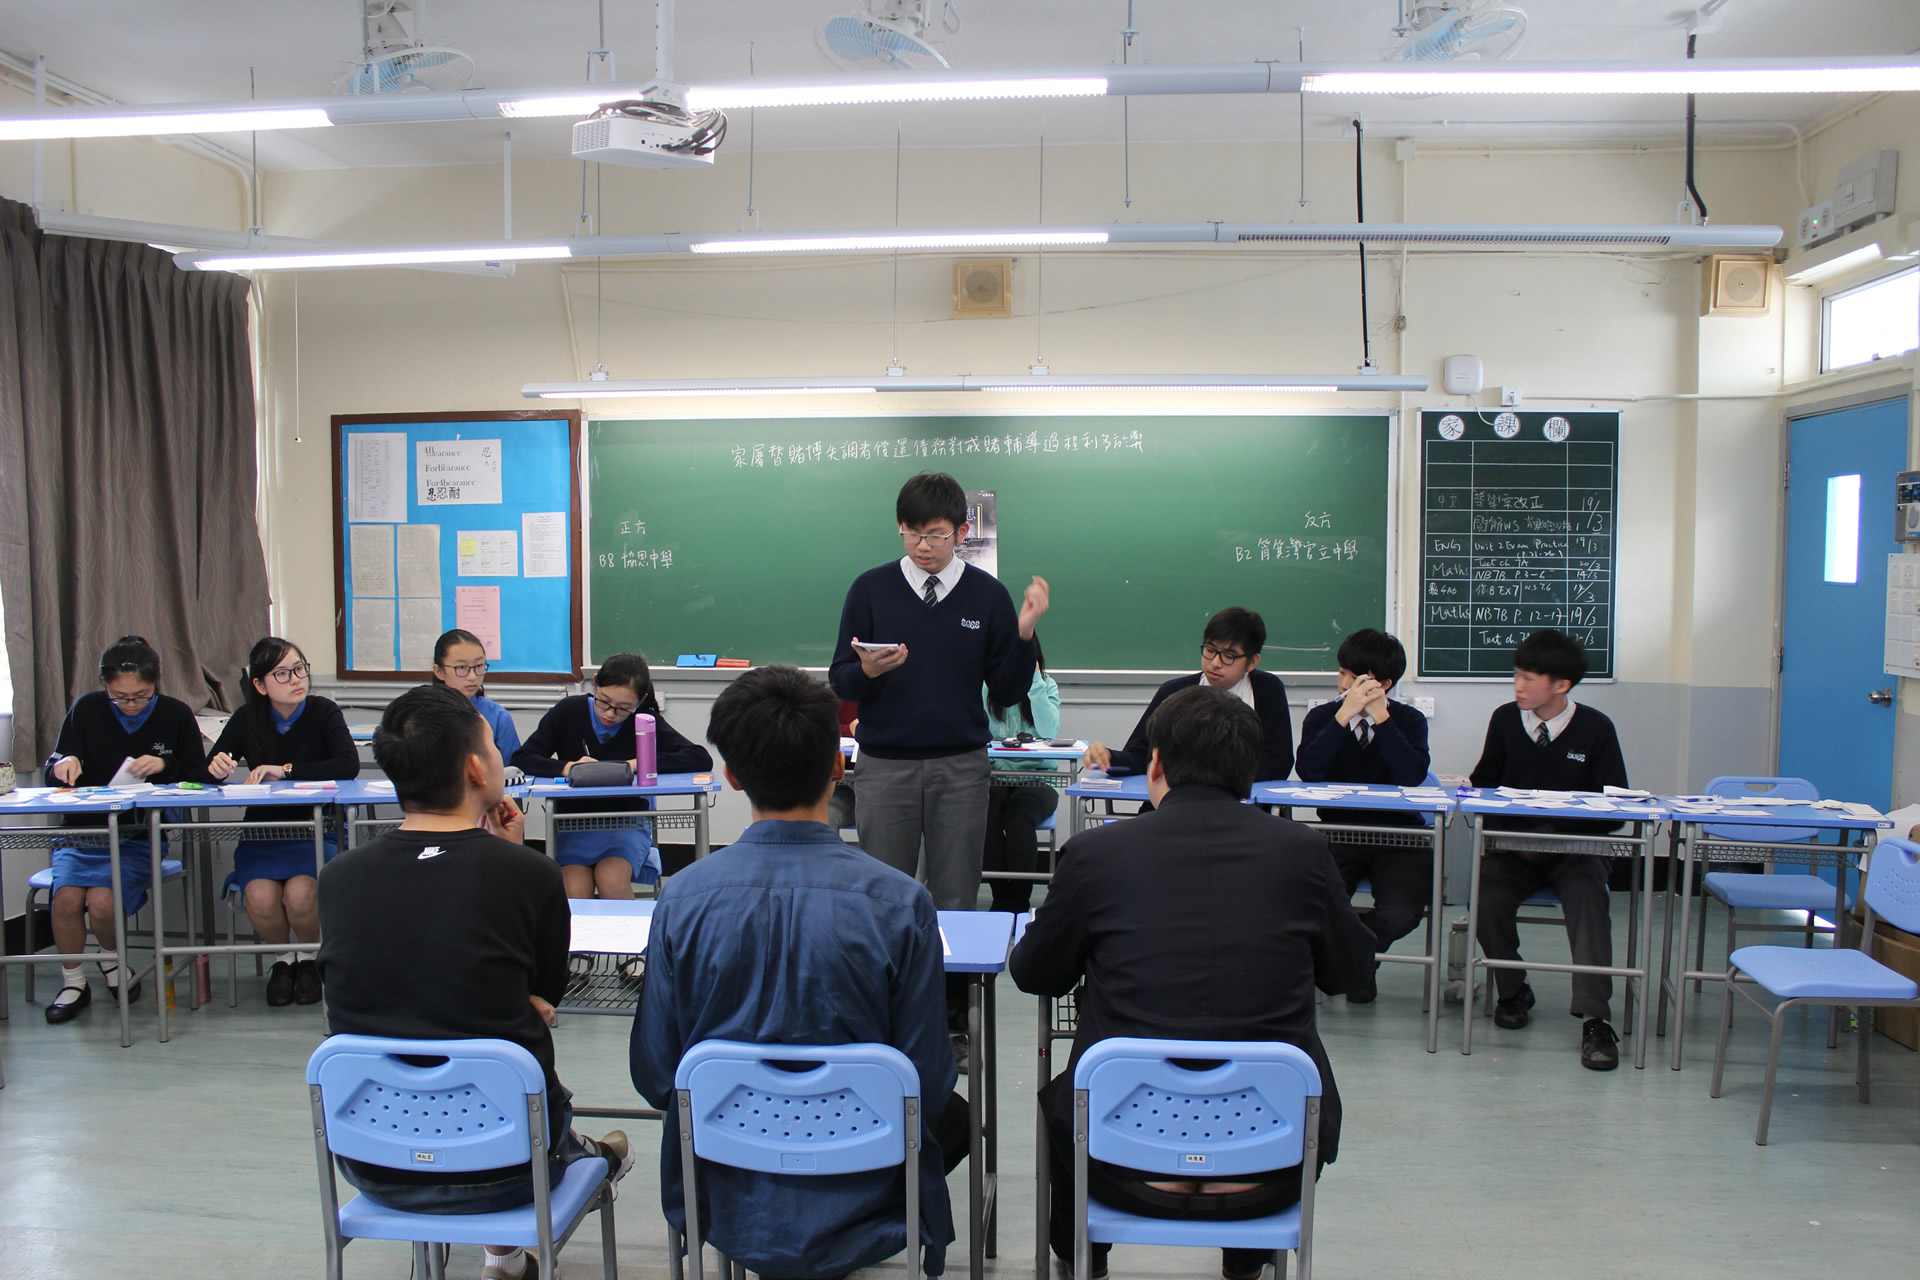 Preliminary sessions were conducted in February and March among 32 secondary schools.